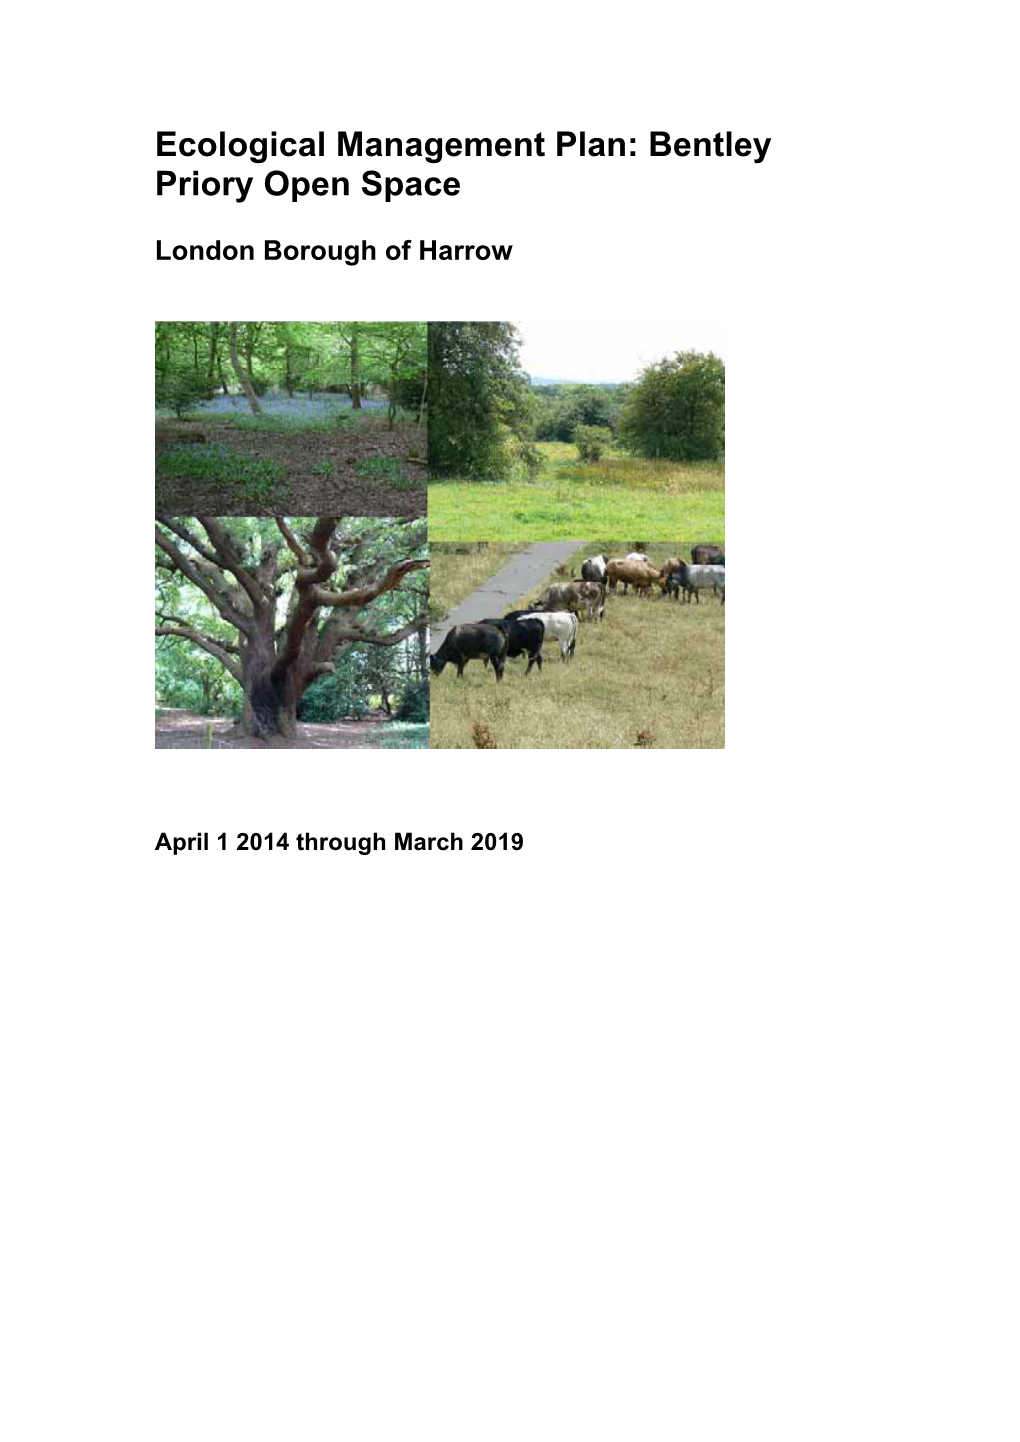 Ecological Management Plan: Bentley Priory Open Space